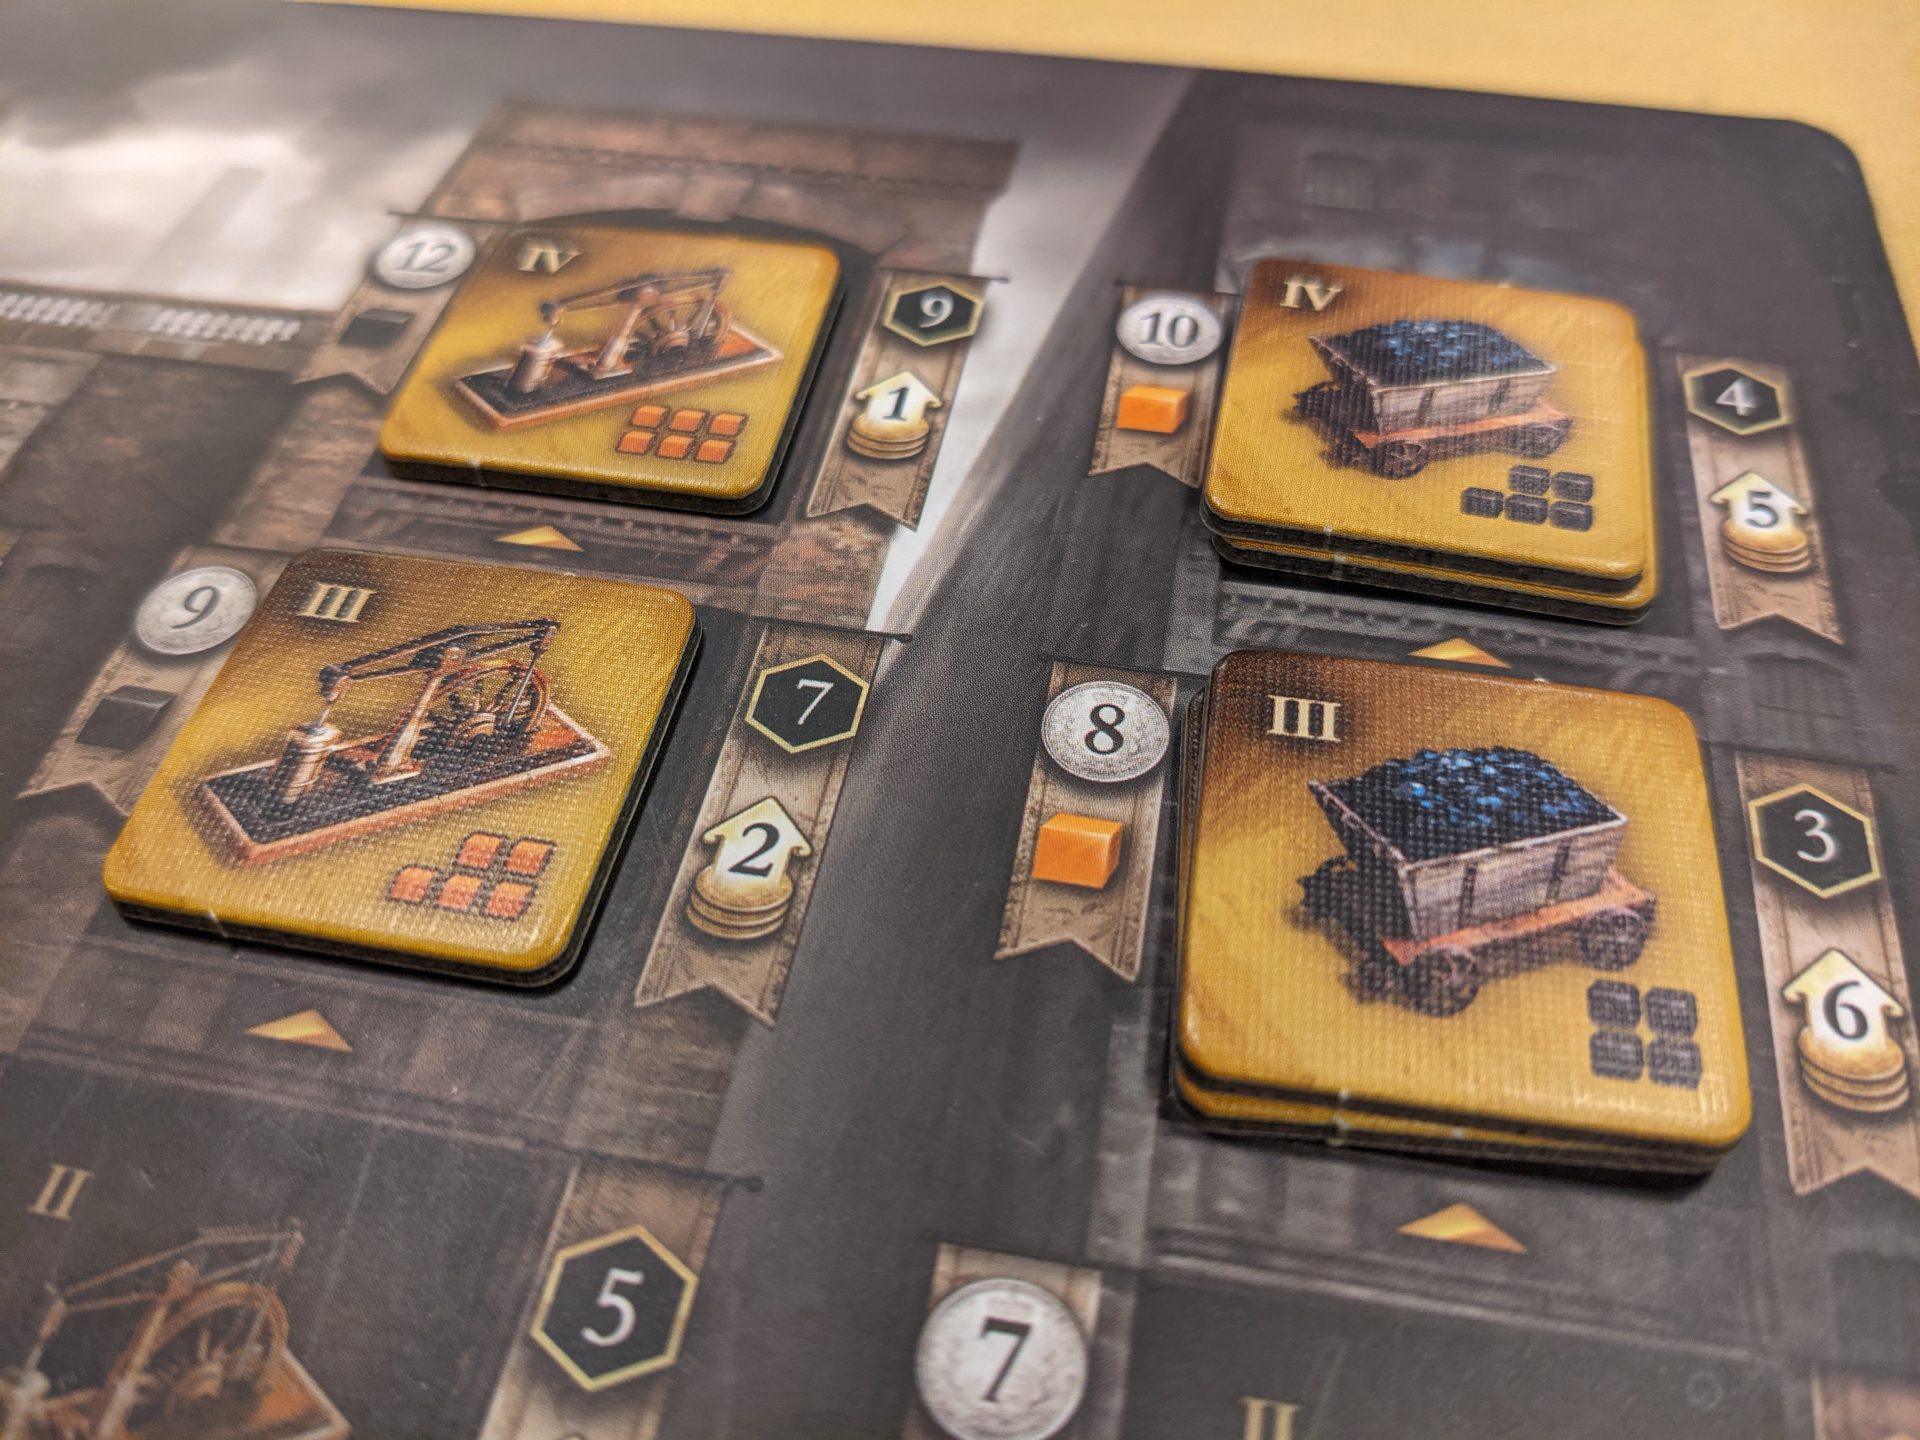 Brass: Pevans reviews Martin Wallace's board game